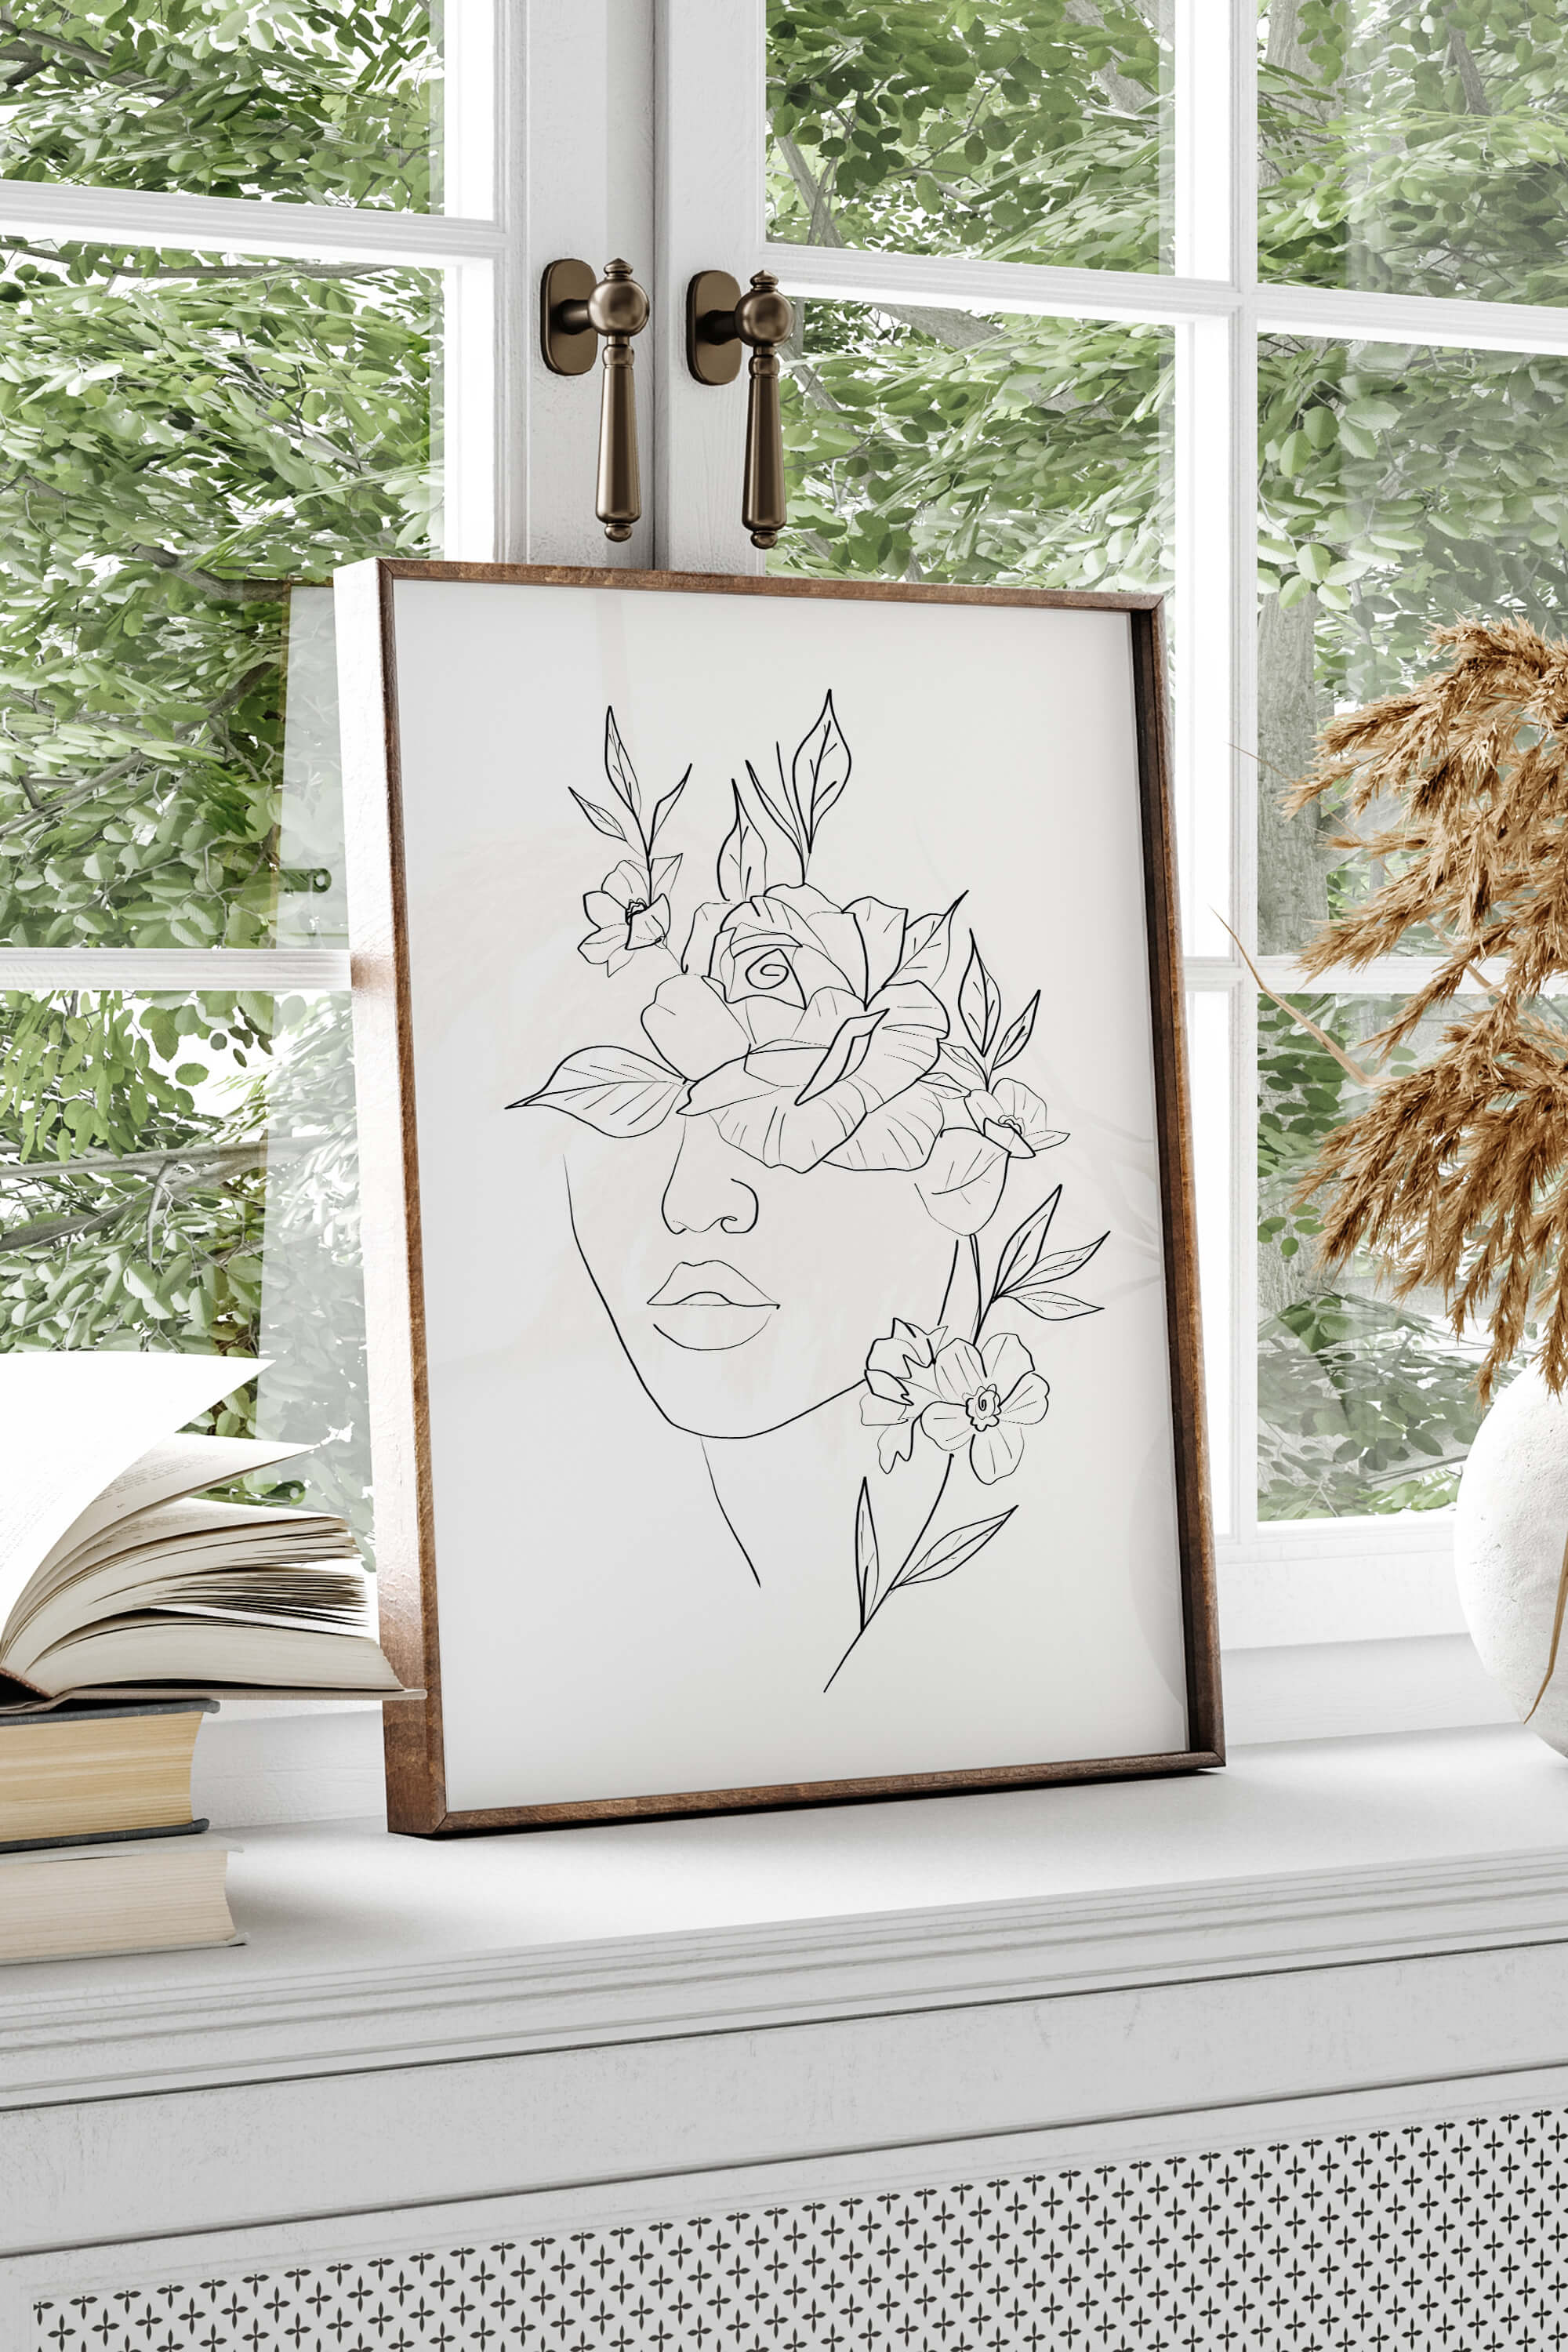 A celebration of nature's grace, this line art print captures the essence of femininity with a woman's face adorned by intricate floral details, offering a unique and captivating visual experience.